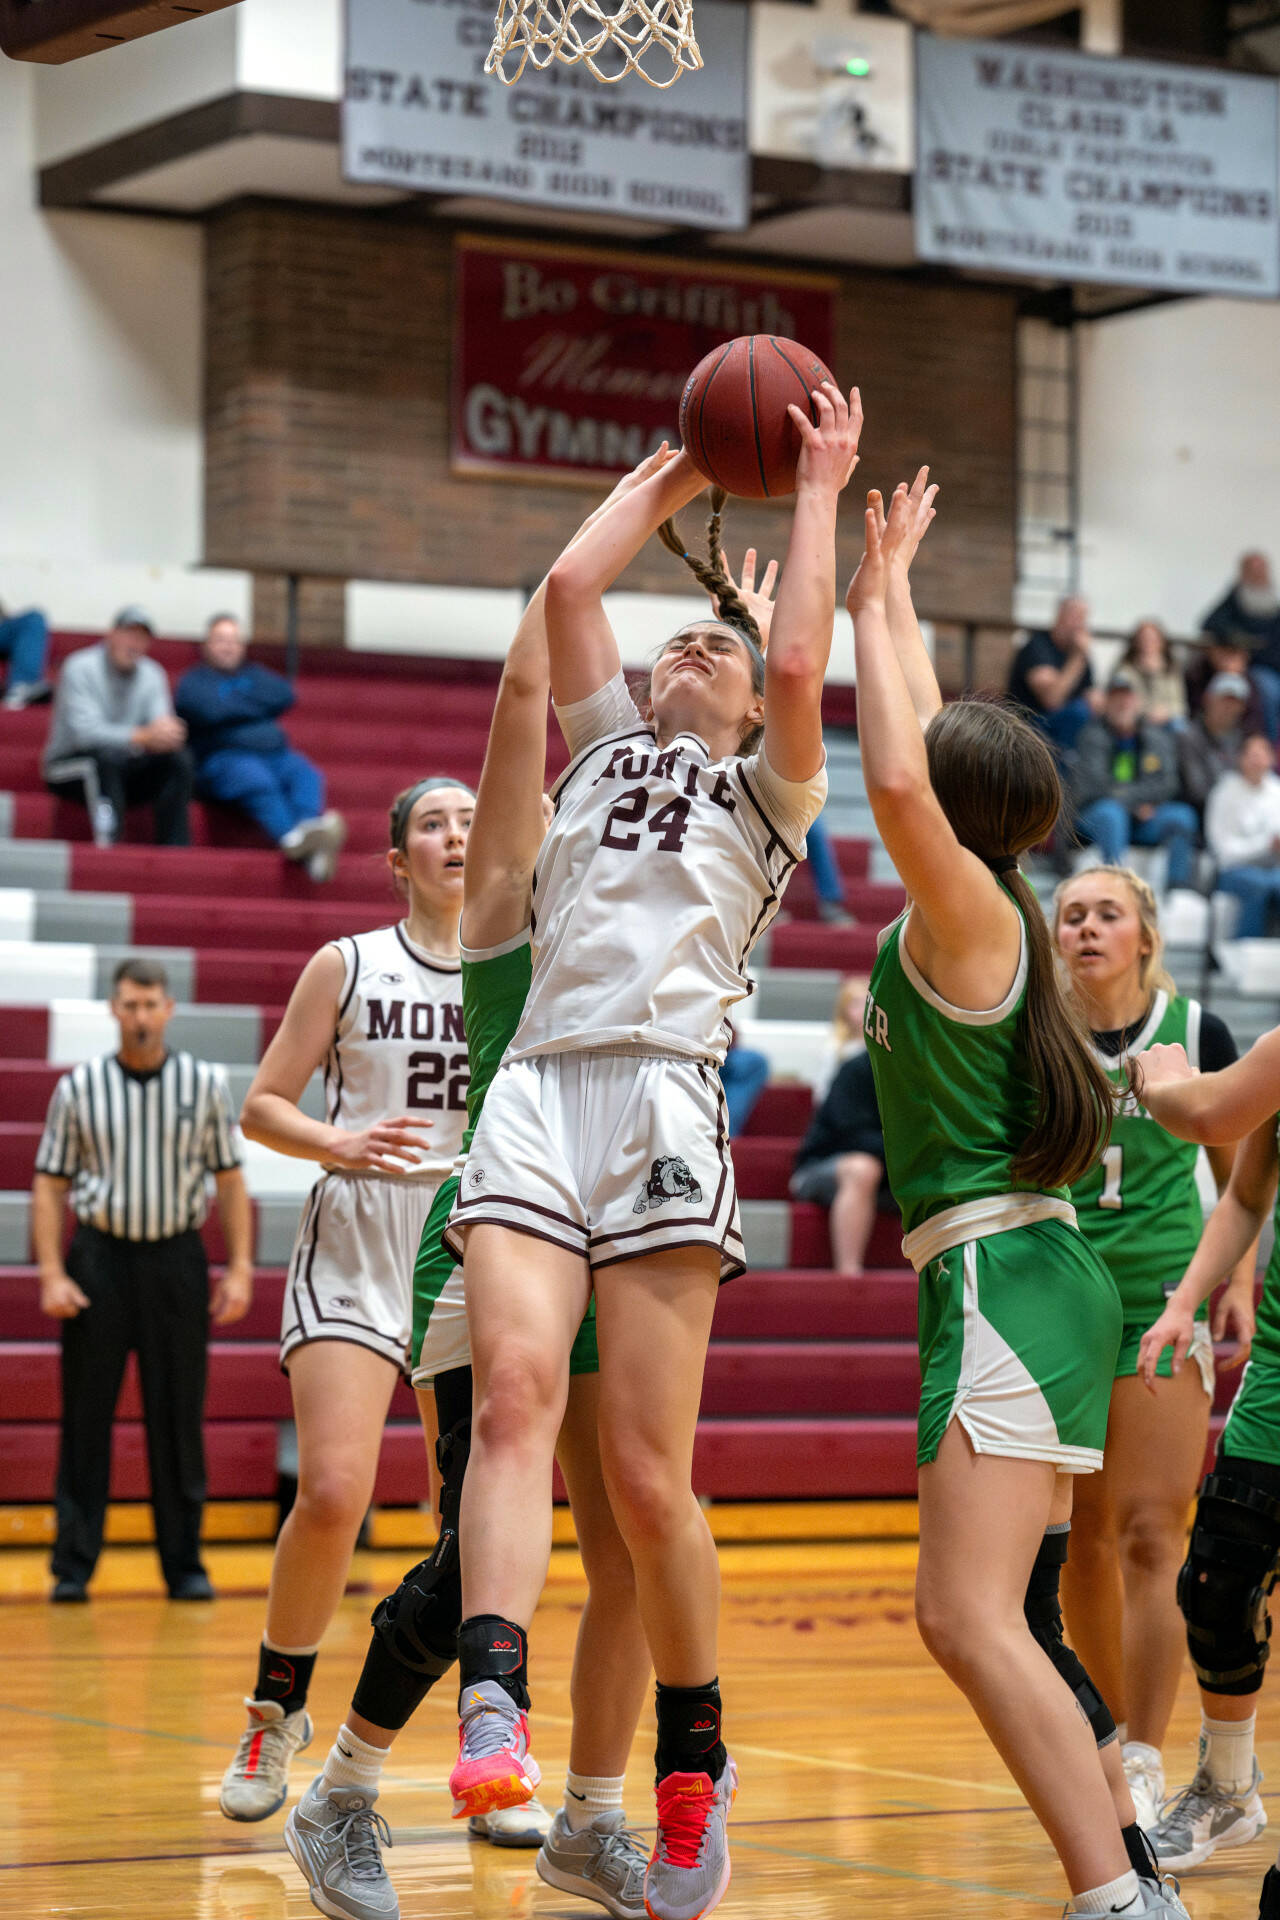 PHOTO BY FOREST WORGUM Montesano’s Jillie Dalan (24) had a double-double in a 28-23 loss to Tumwater on Saturday in Montesano.